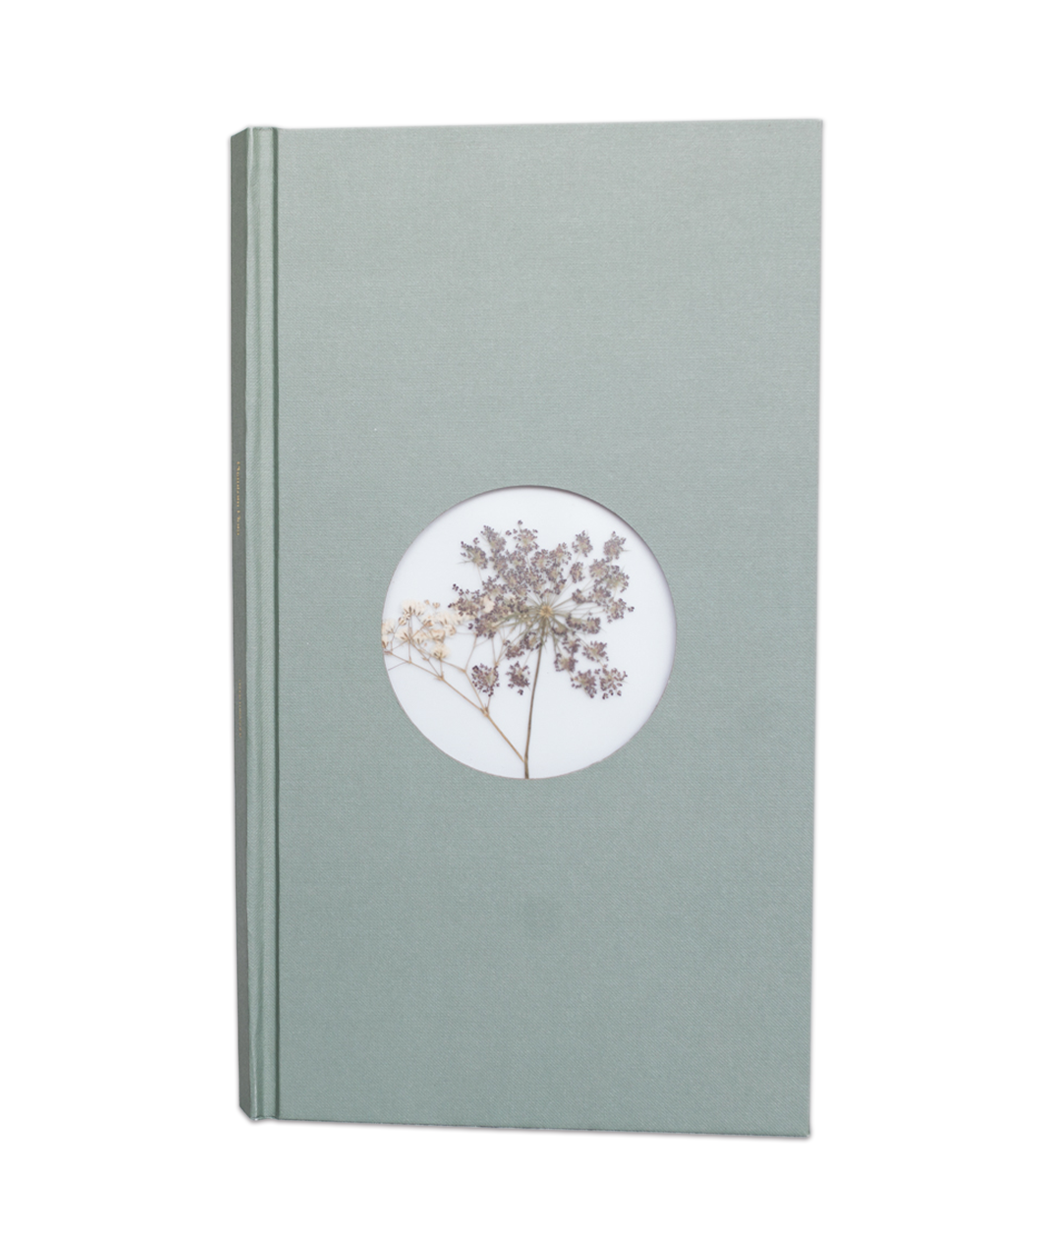 A tall, pale green book with a round center peekaboo cutout that holds pressed flowers, by Tyler Thrasher.